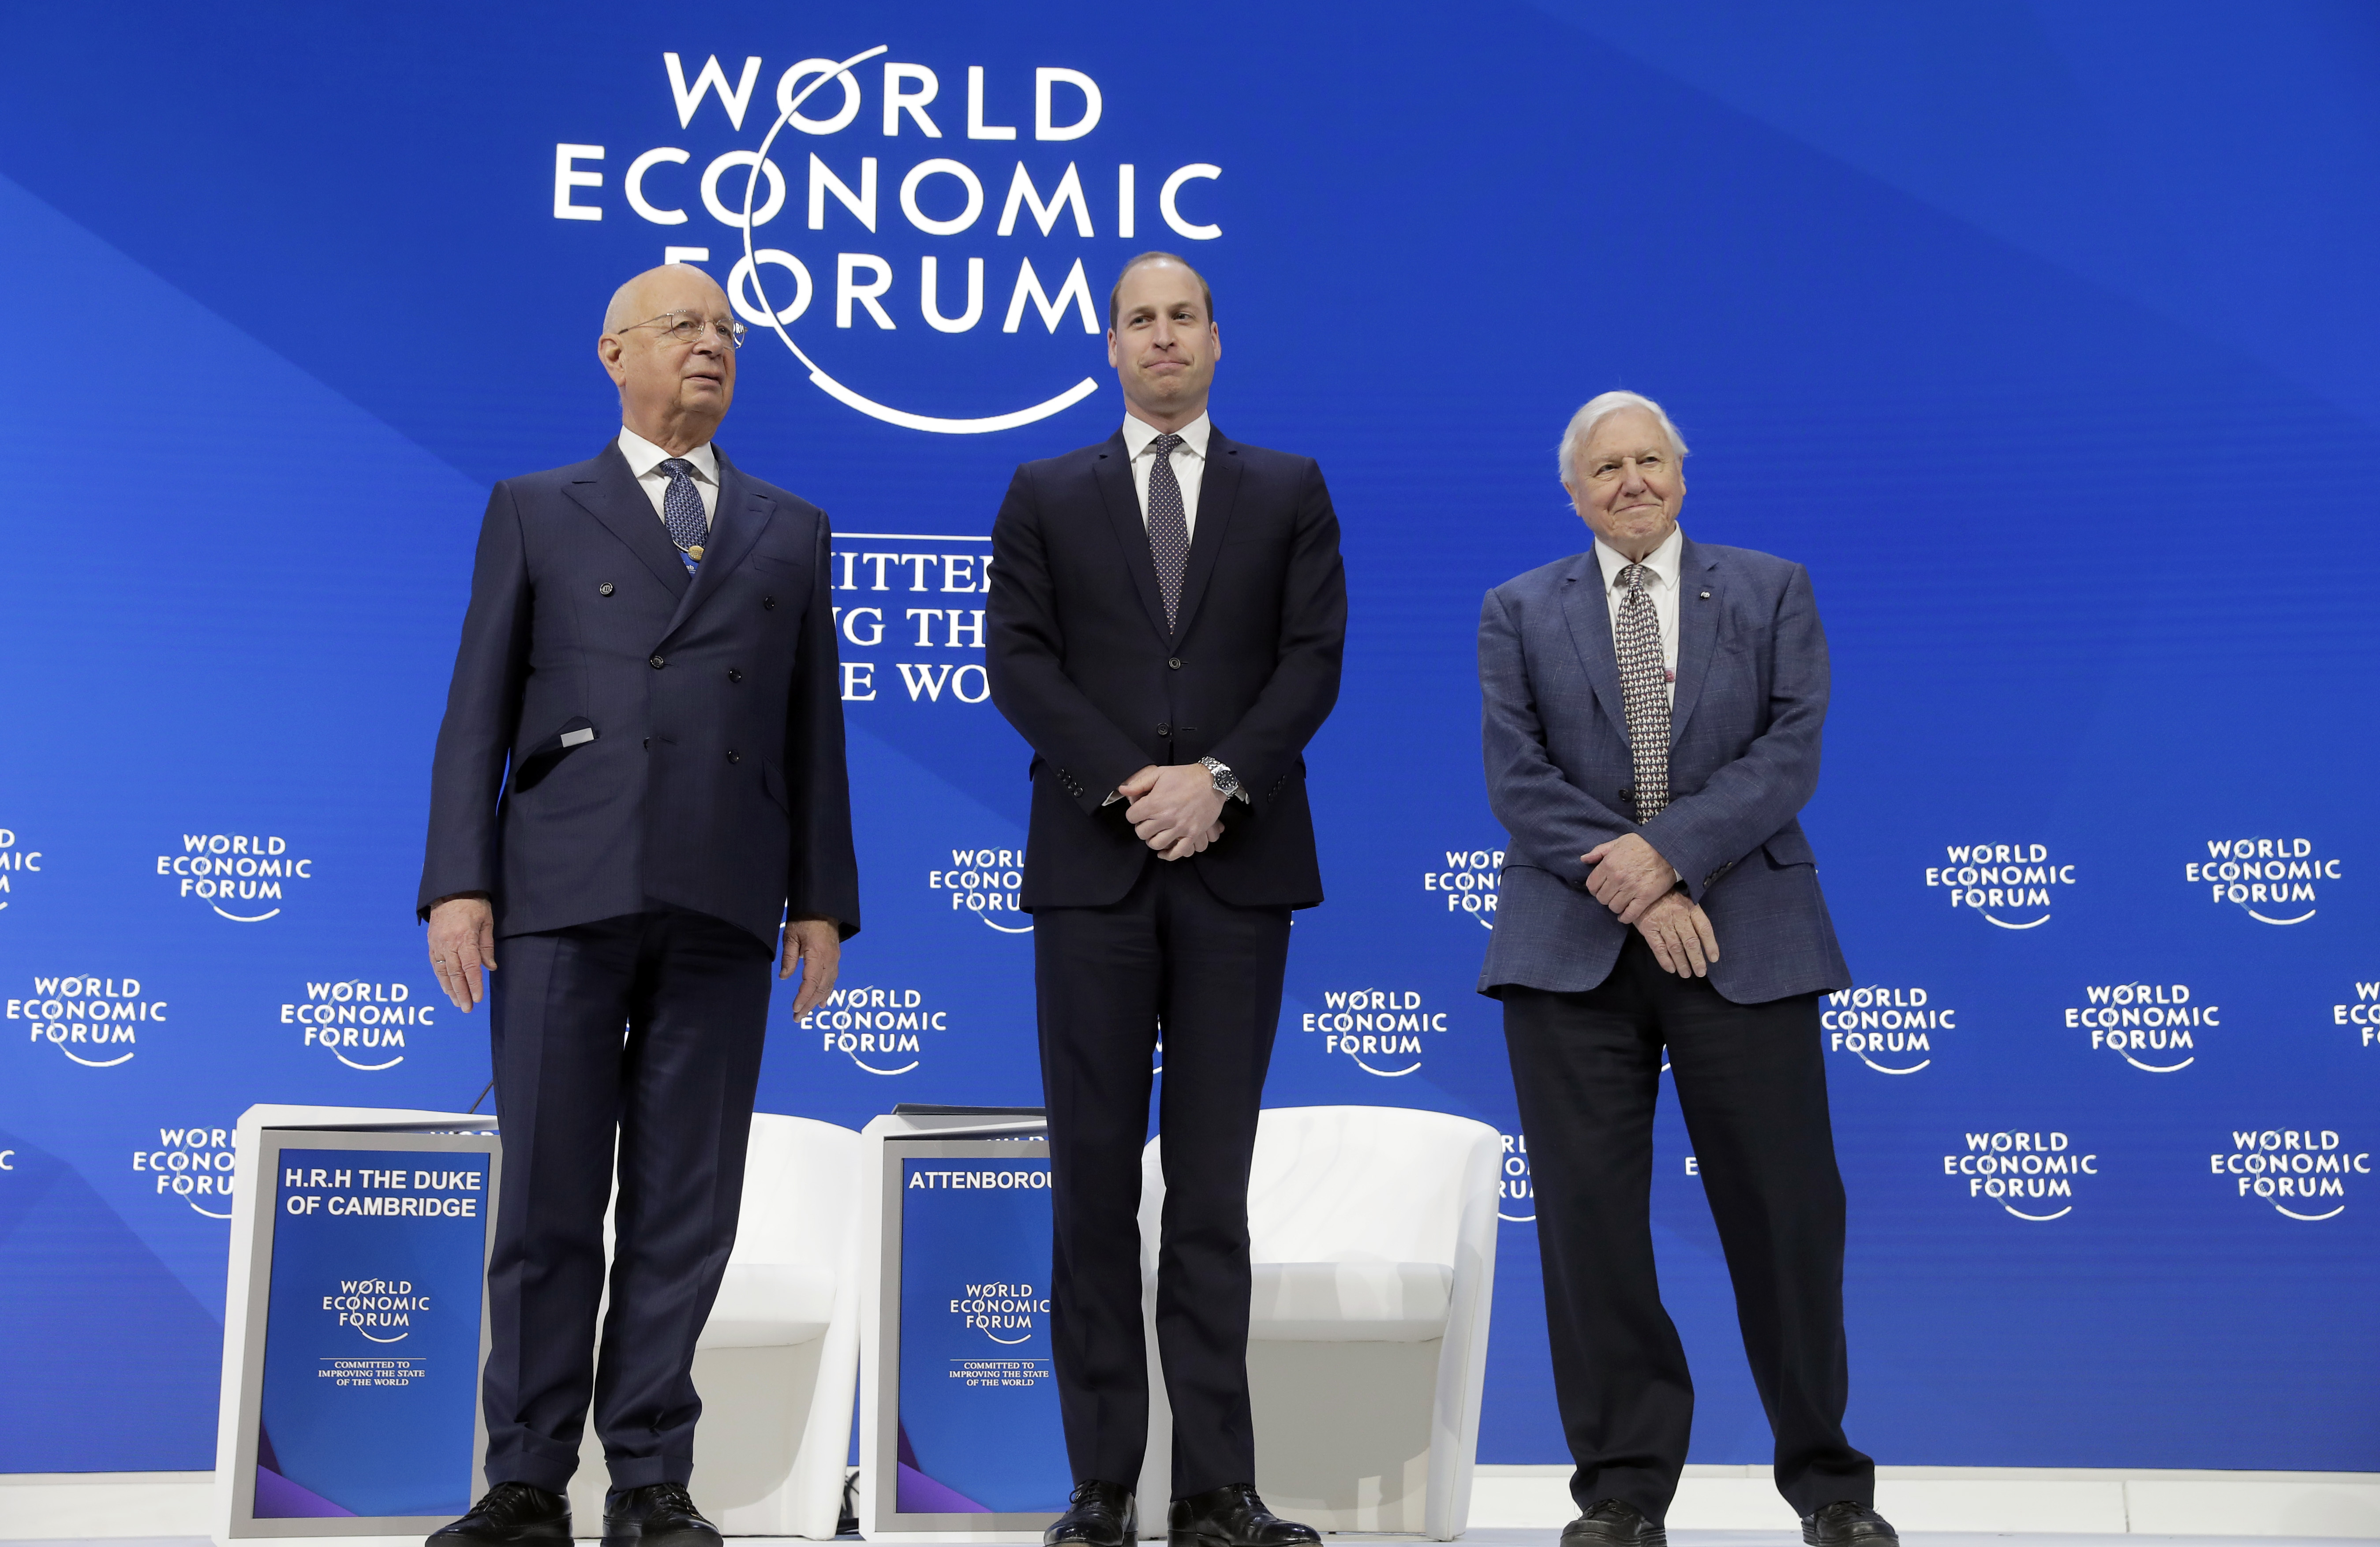 Klaus Schwab, founder and Executive Chairman of the World Economic Forum, Britain's Prince William, and Sir David Attenborough, broadcaster and natural historian, from left to right, stand together during a session at the annual meeting of the World Economic Forum in Davos, Switzerland, Tuesday, Jan. 22, 2019. (AP Photo/Markus Schreiber)